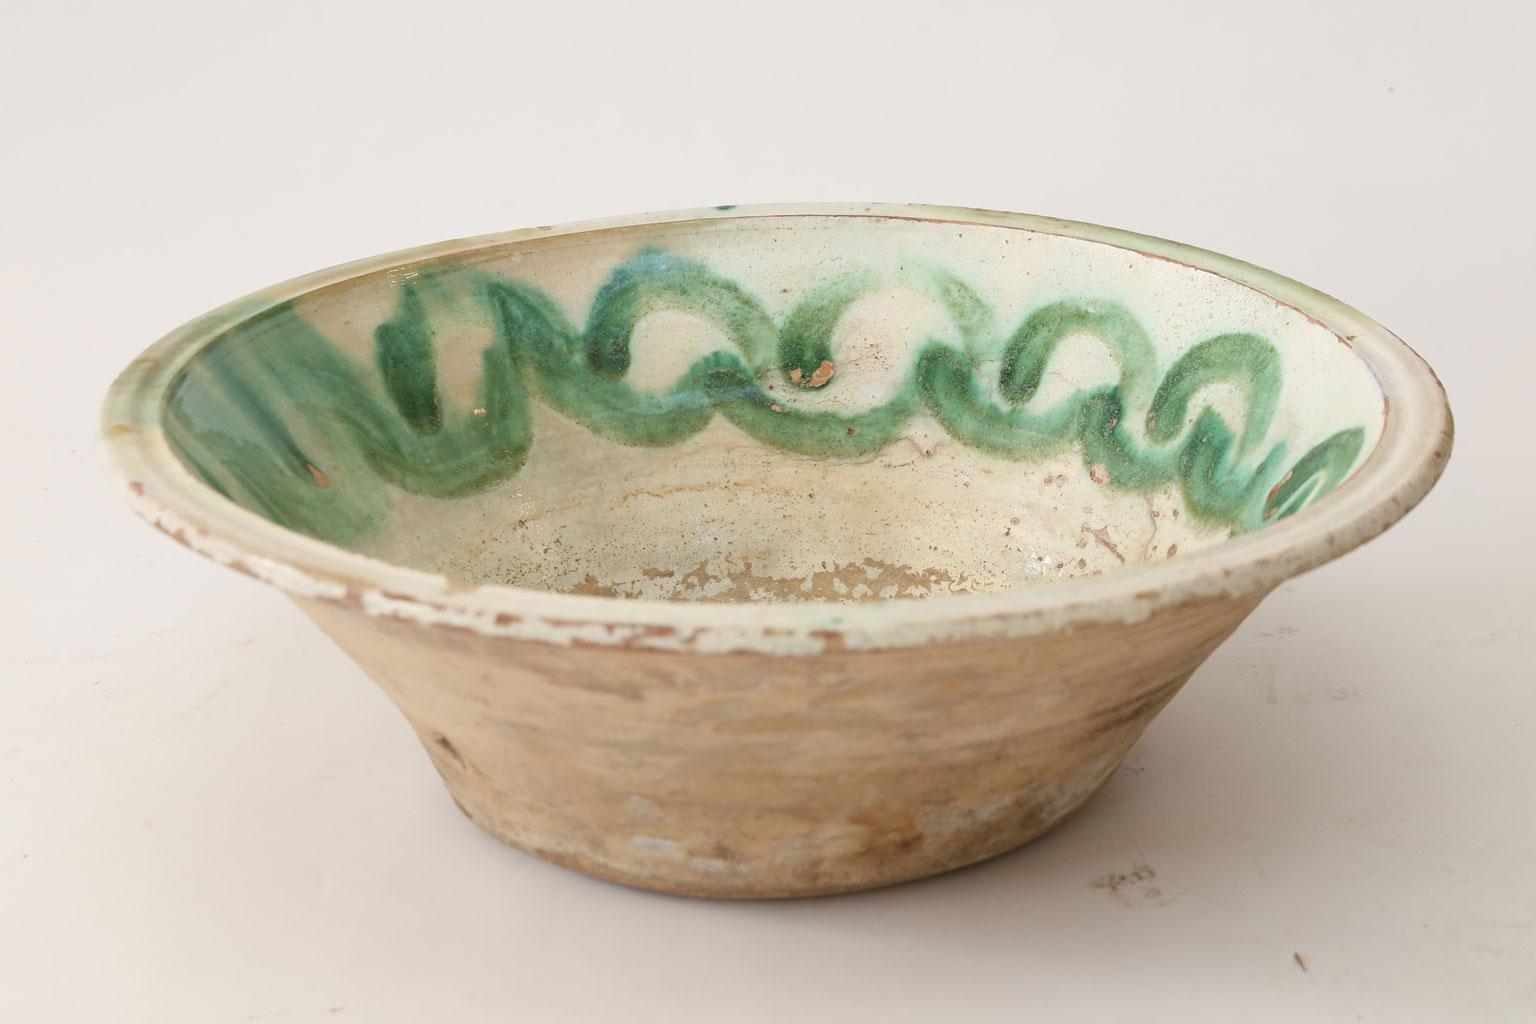 Large 18th century Majolica tian (tin-glazed earthenware bowl) from Provence.